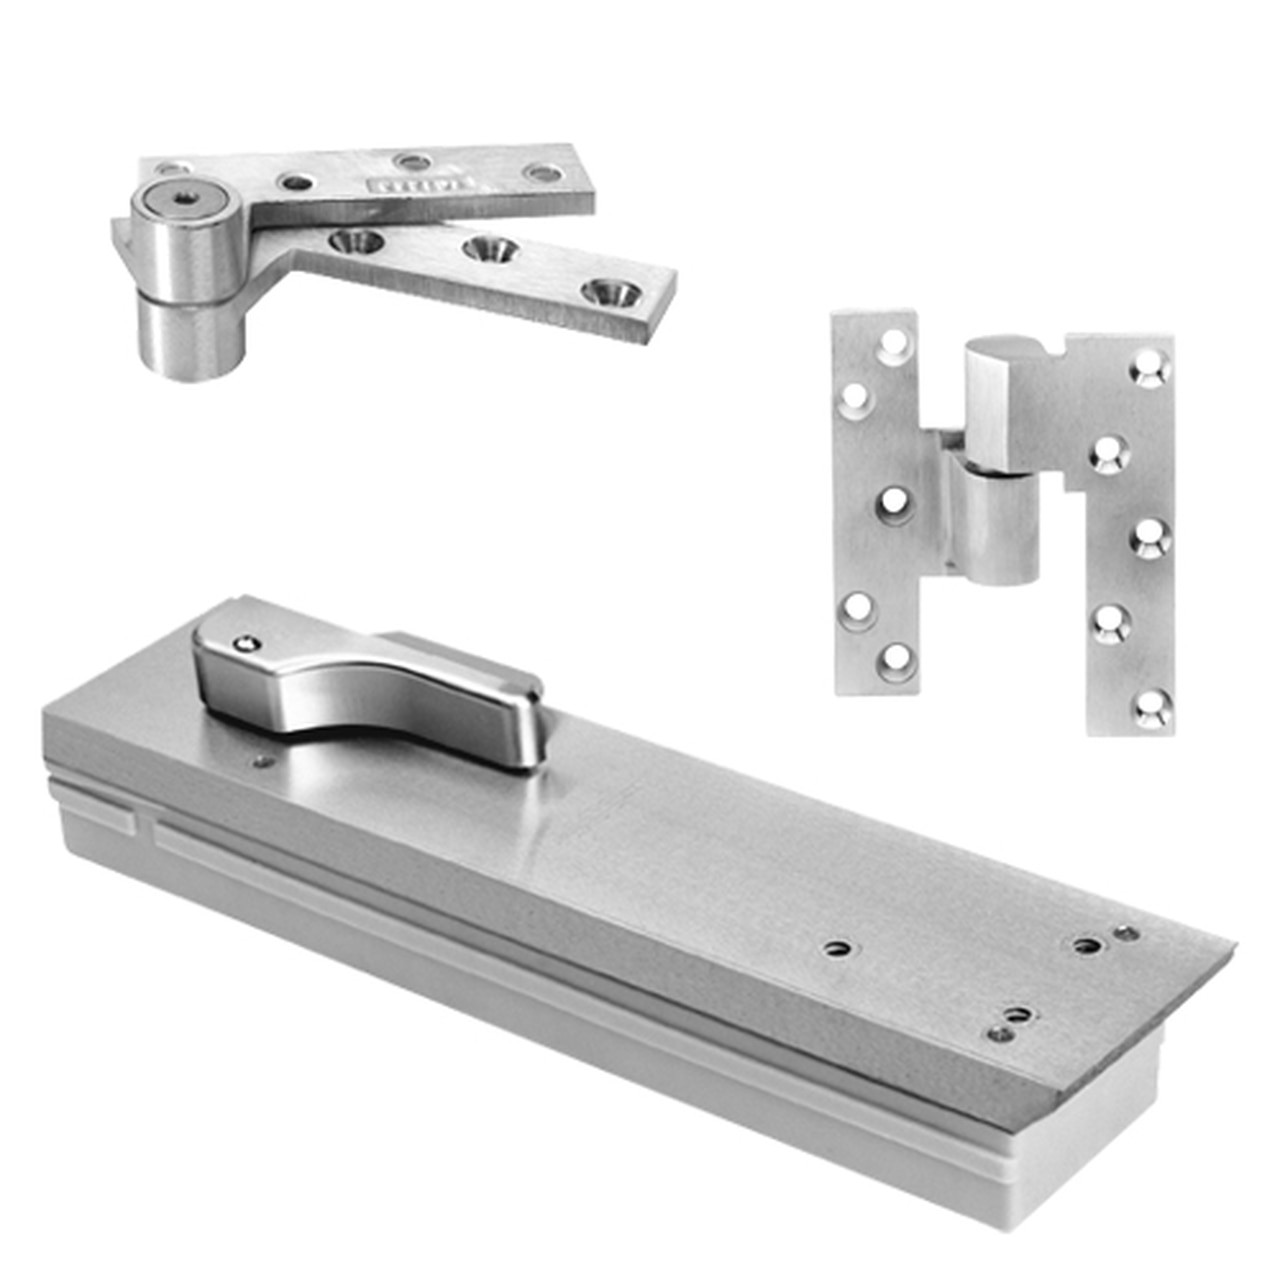 FQ5103NBC-SC-LH-625 Rixson Q51 Series Fire Rated 3/4" Offset Hung Shallow Depth Floor Closers in Bright Chrome Finish